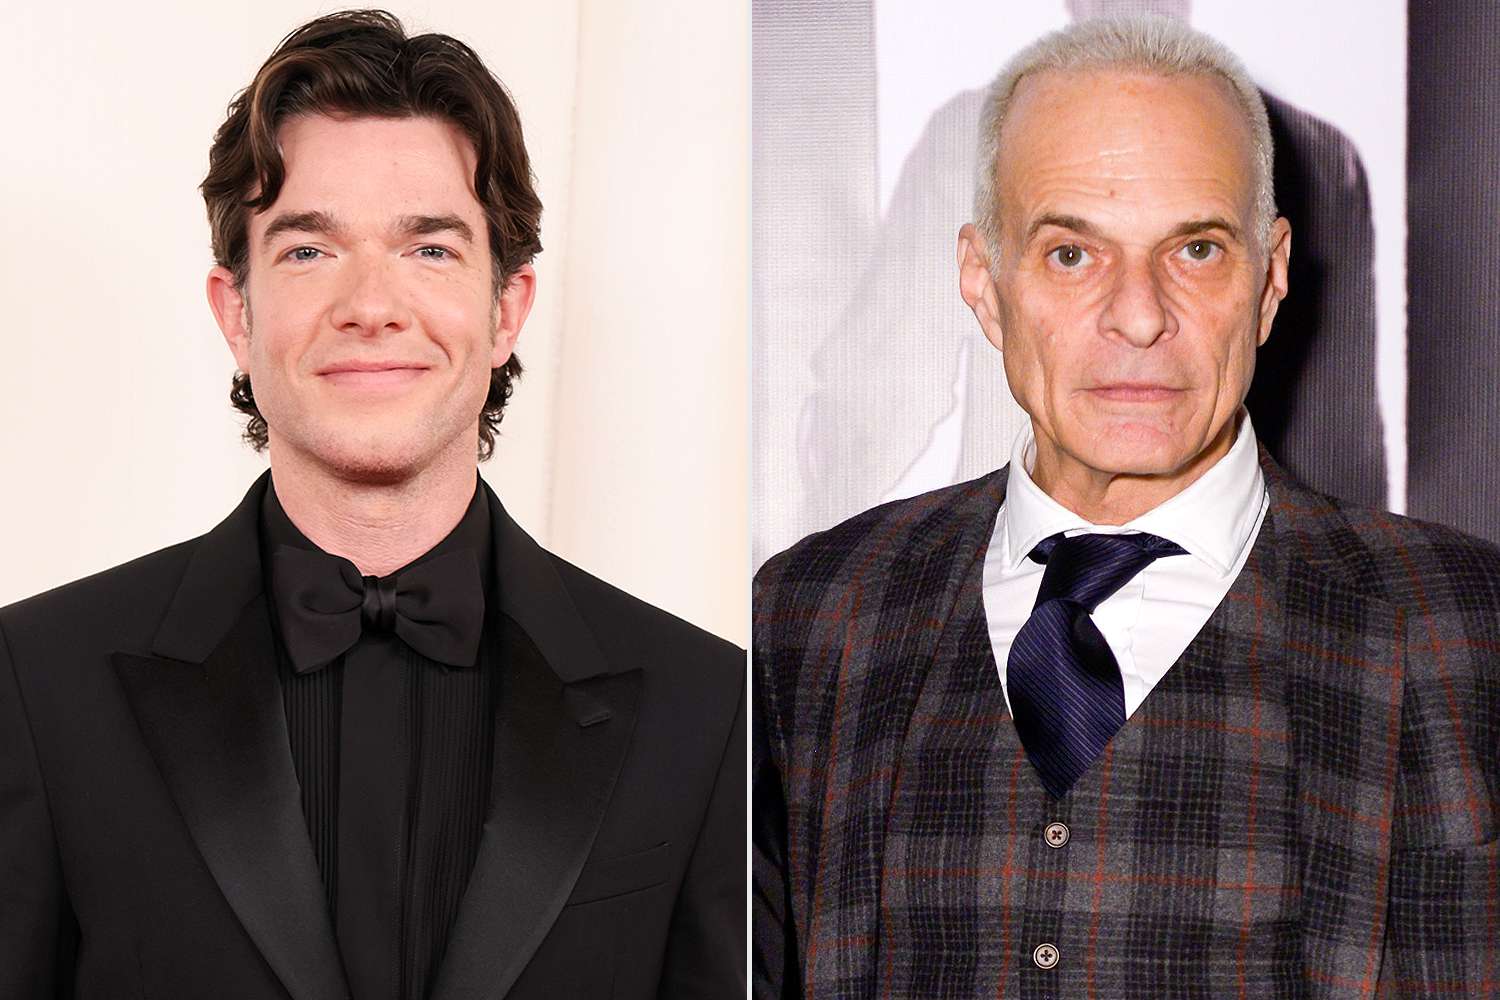 John Mulaney says David Lee Roth turned down his live comedy show: 'I didn't know how to appeal to him'